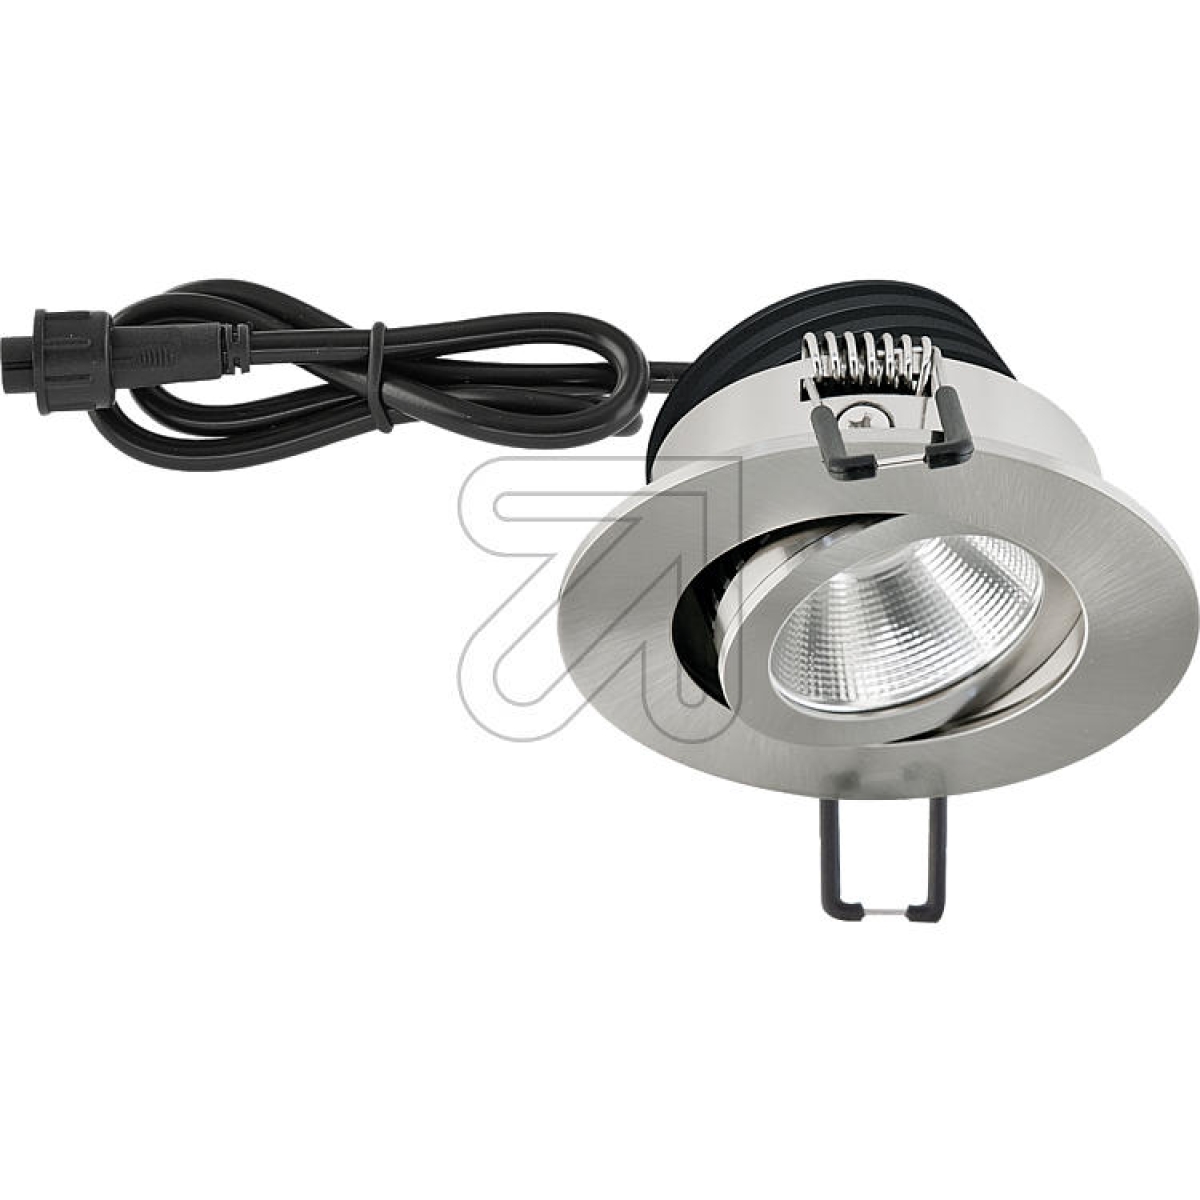 EVNLED recessed light IP65 stainless steel look 3000K 8.4W PC650N91302Article-No: 686260